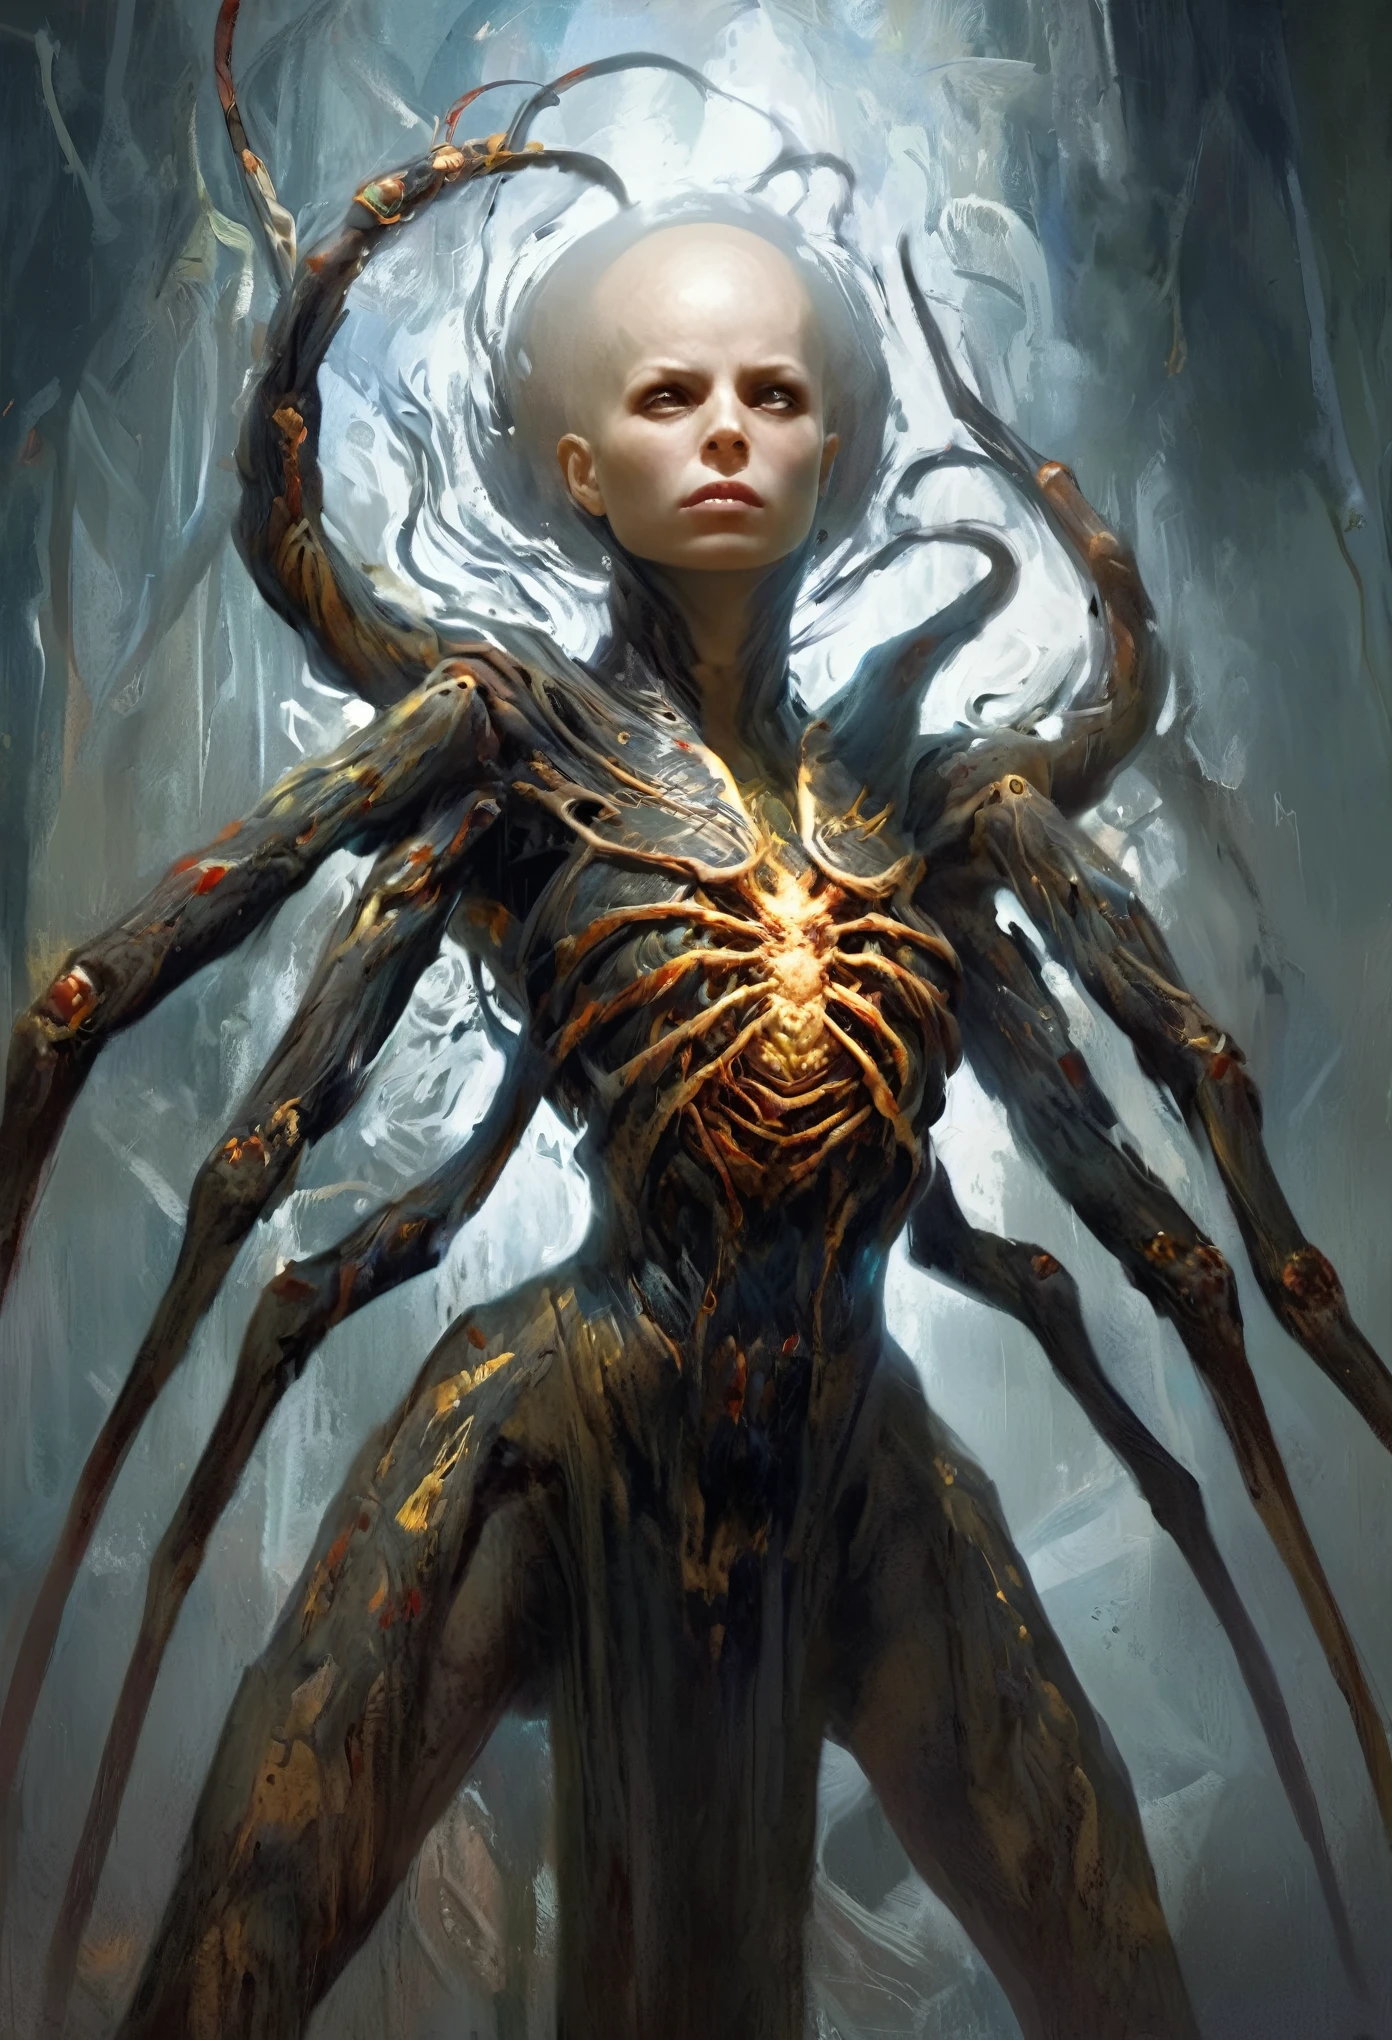 best quality,4k,8k,highres,masterpiece:1.2),ultra-detailed,realistic,photorealistic:1.37,this creature, a terrifying fusion of spider and human female with six arms, embodies a grotesque harmony of two distinct forms. Its upper body retains the unmistakable features of a woman, albeit distorted by the merging process. its eyes gleam with a sinister intelligence, more arachnid than human. (no hair, white skin:1.3),

From the torso sprout four additional limbs, elongated and jointed like a spider's, yet retaining a disturbingly human fleshiness. These arms are equipped with fingers that end in sharp, chitinous claws, capable of rending flesh with ease.

The lower body is a fusion of spider and human anatomy, with the abdomen stretching out behind like that of a monstrous arachnid. Jagged spines protrude from its exoskeleton, each one a reminder of its unnatural origins. The legs, a grotesque combination of human thighs and spider's hairy appendages, provide both agility and strength, enabling it to skitter across surfaces with alarming speed and grace.

In its presence, one cannot help but feel a primal fear, as if staring into the abyss where human and arachnid merge to create a nightmare incarnate.